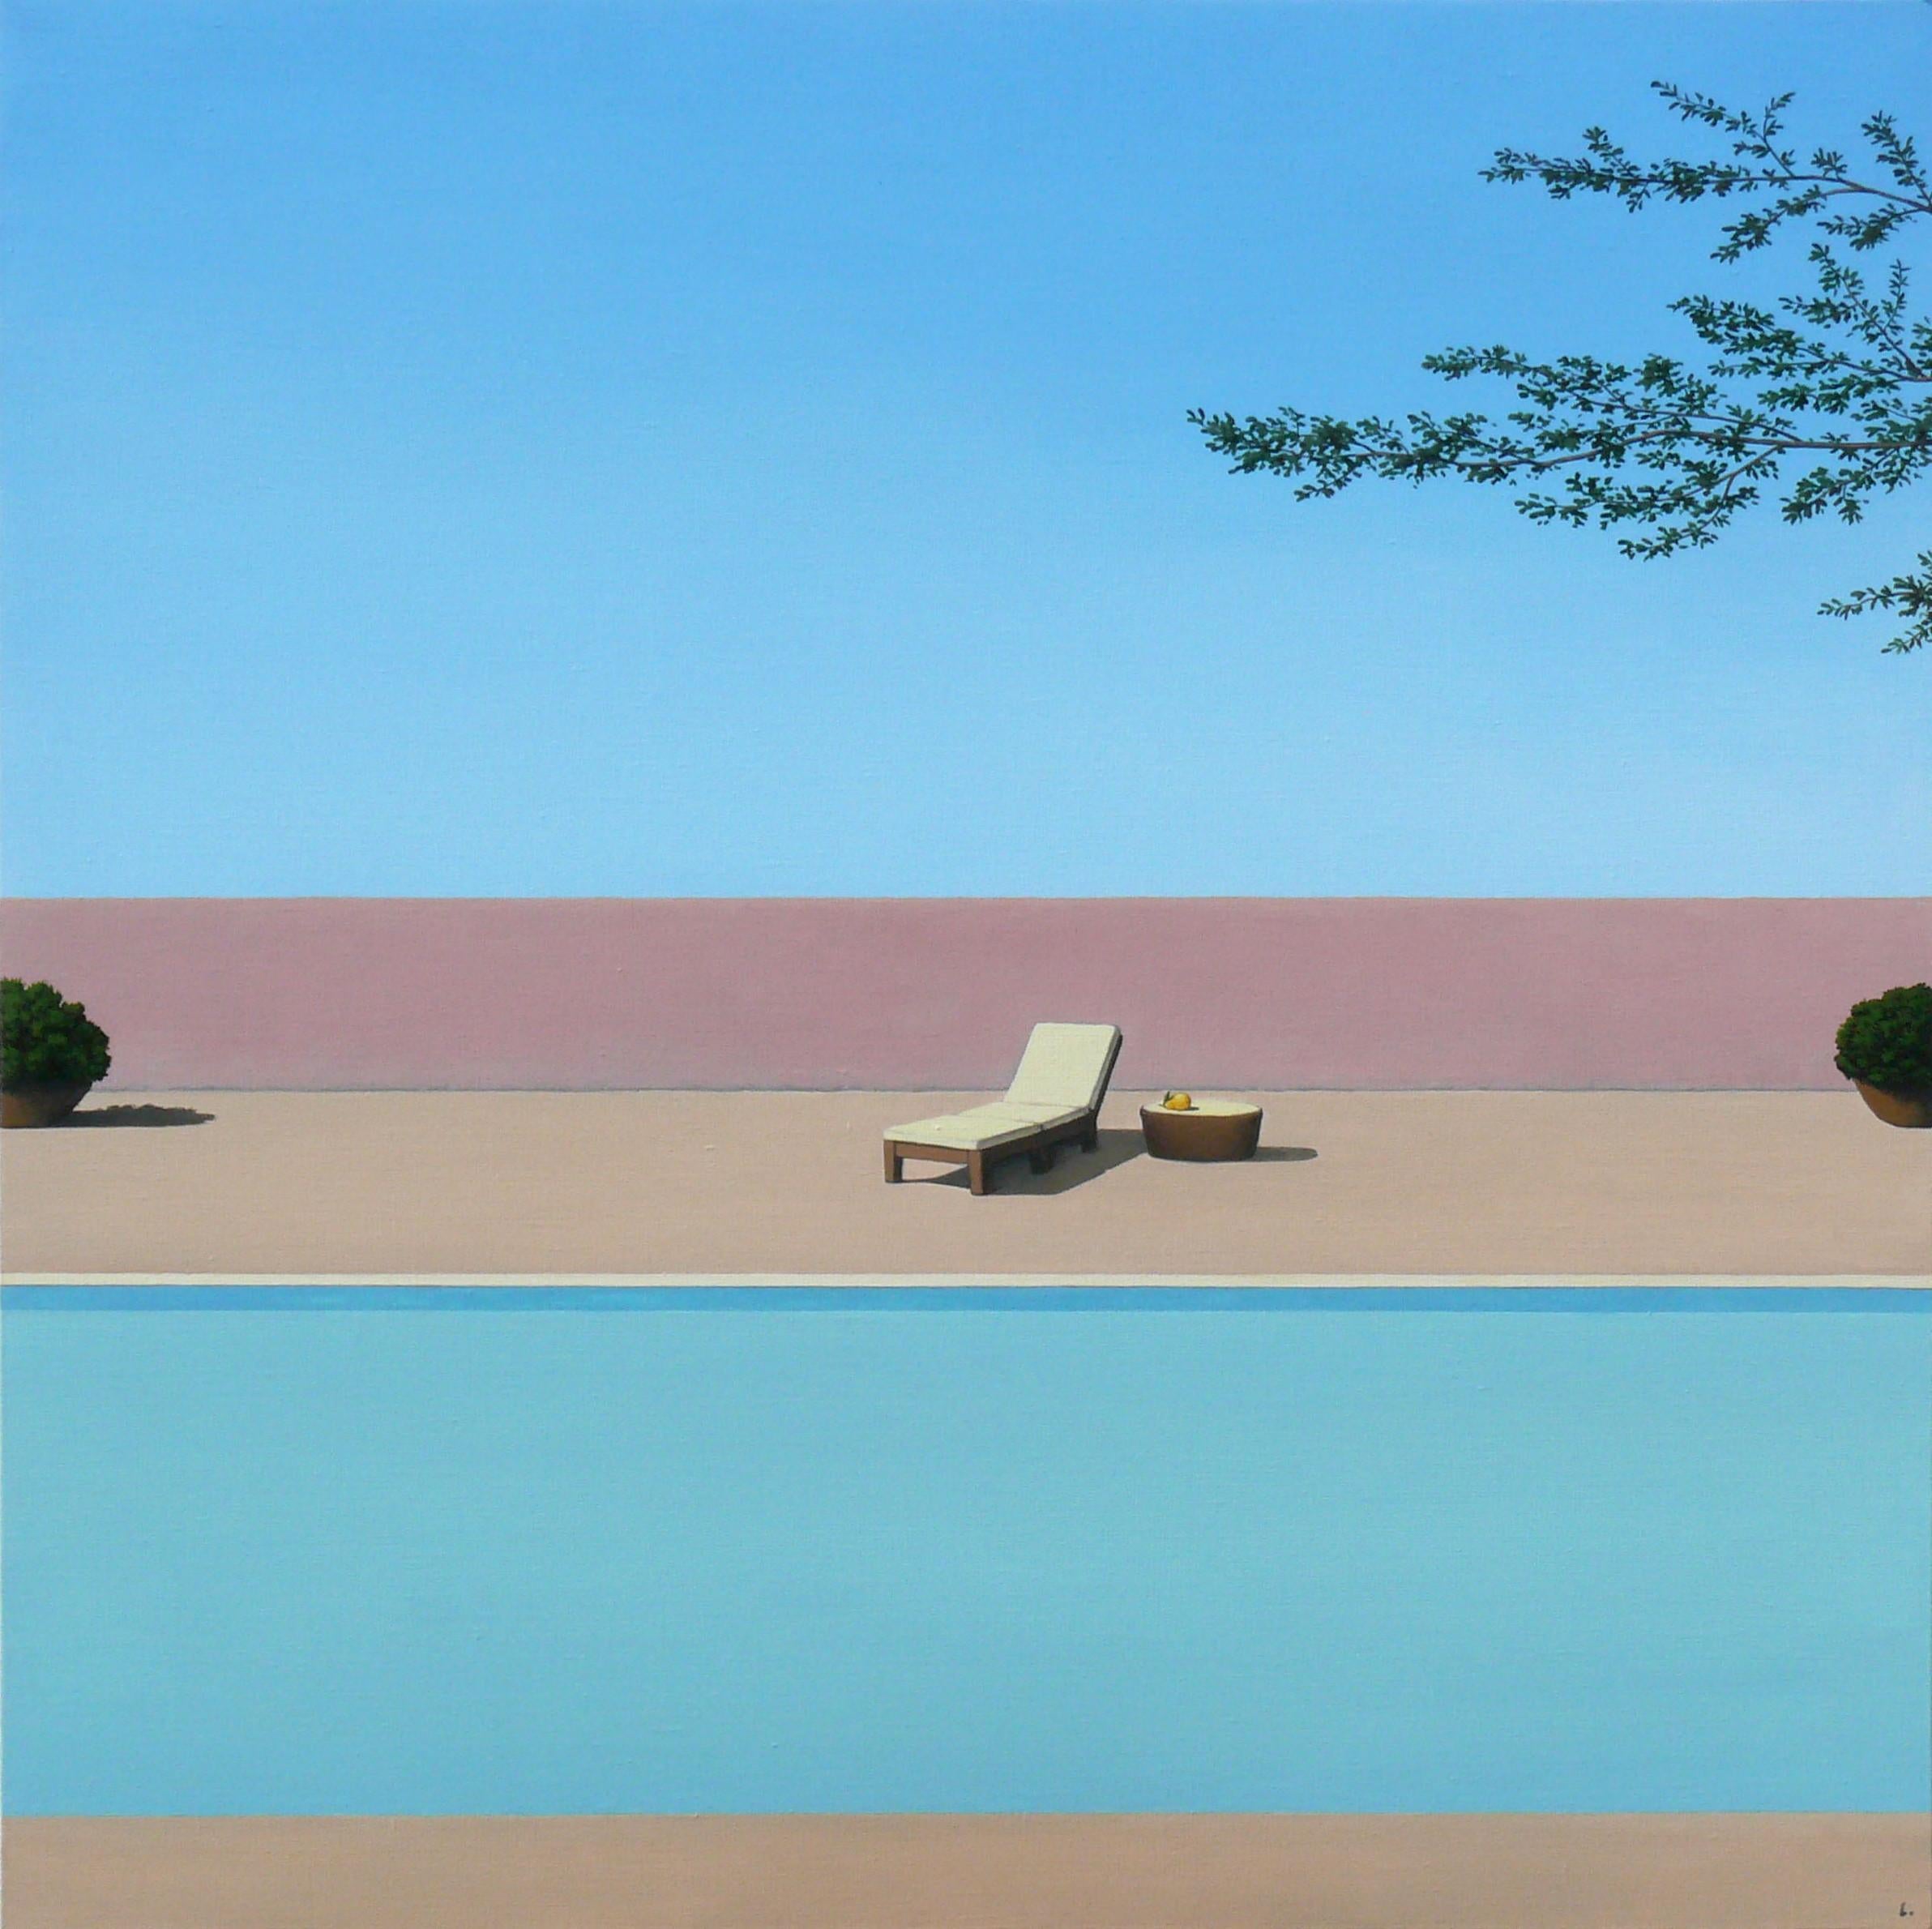 Pool with a pear - Blue Landscape Painting by Magdalena Laskowska